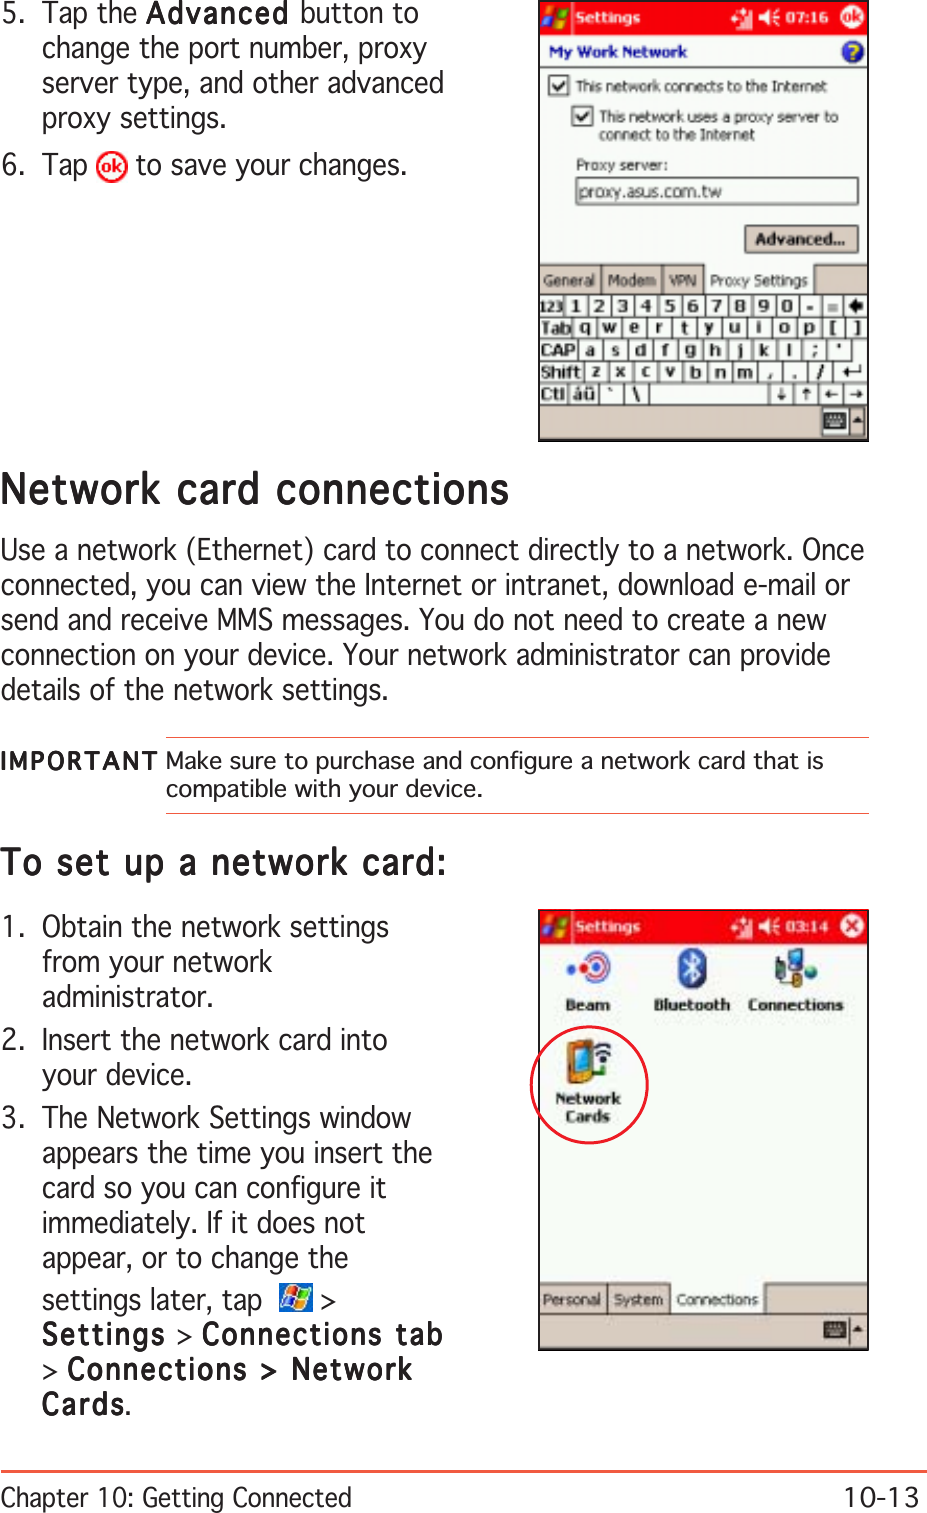 Chapter 10: Getting Connected10-135. Tap the AdvancedAdvancedAdvancedAdvancedAdvanced button tochange the port number, proxyserver type, and other advancedproxy settings.6. Tap   to save your changes.Network card connectionsNetwork card connectionsNetwork card connectionsNetwork card connectionsNetwork card connectionsUse a network (Ethernet) card to connect directly to a network. Onceconnected, you can view the Internet or intranet, download e-mail orsend and receive MMS messages. You do not need to create a newconnection on your device. Your network administrator can providedetails of the network settings.IMPORTANTIMPORTANTIMPORTANTIMPORTANTI M P O R T A N T Make sure to purchase and configure a network card that iscompatible with your device.To set up a network card:To set up a network card:To set up a network card:To set up a network card:To set up a network card:1. Obtain the network settingsfrom your networkadministrator.2. Insert the network card intoyour device.3. The Network Settings windowappears the time you insert thecard so you can configure itimmediately. If it does notappear, or to change thesettings later, tap  &gt;SettingsSettingsSettingsSettingsSettings &gt; Connections tabConnections tabConnections tabConnections tabConnections tab&gt;Connections &gt; NetworkConnections &gt; NetworkConnections &gt; NetworkConnections &gt; NetworkConnections &gt; NetworkCardsCardsCardsCardsCards.